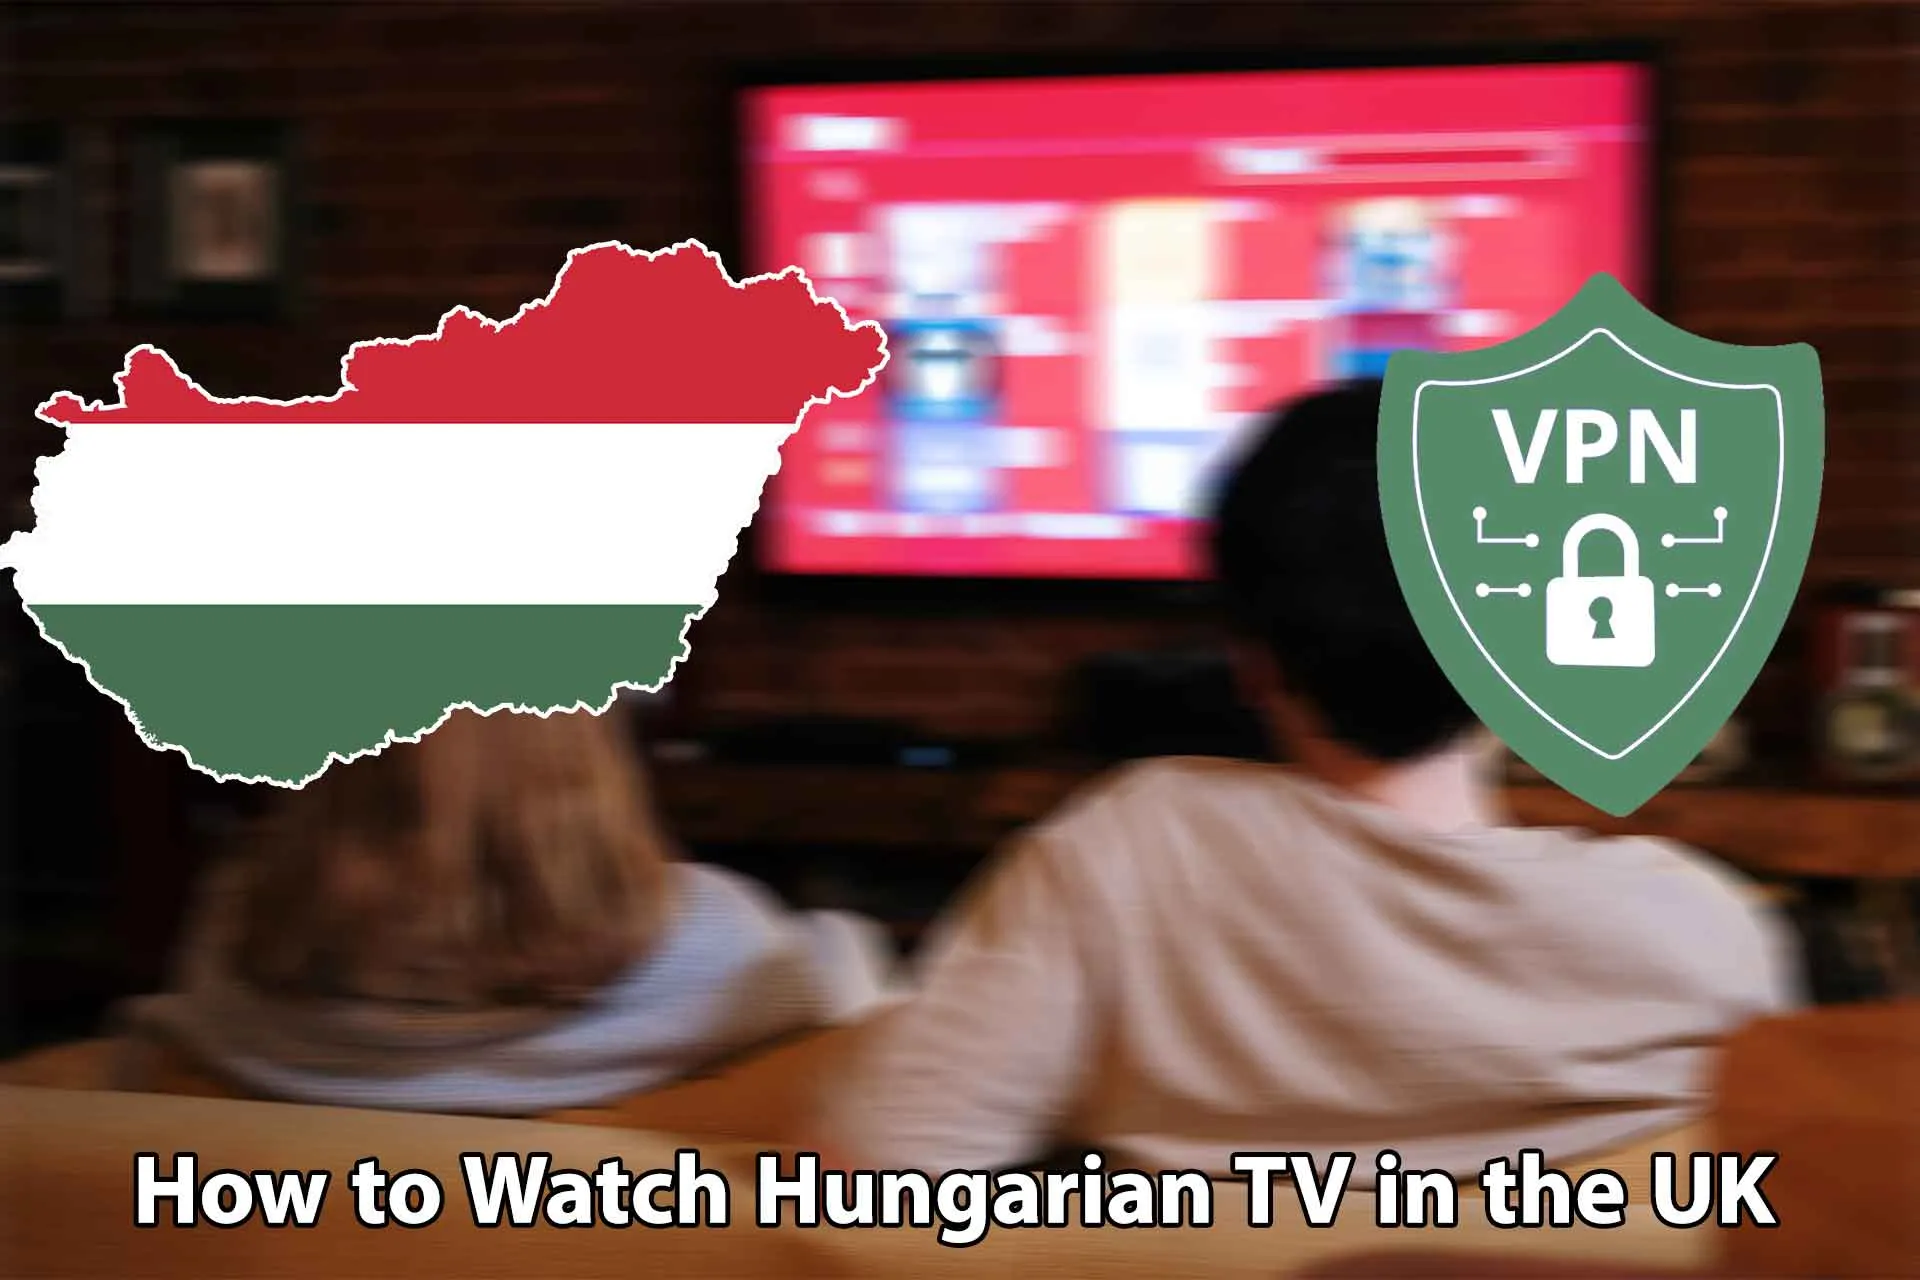 How to Watch Hungarian TV in the UK